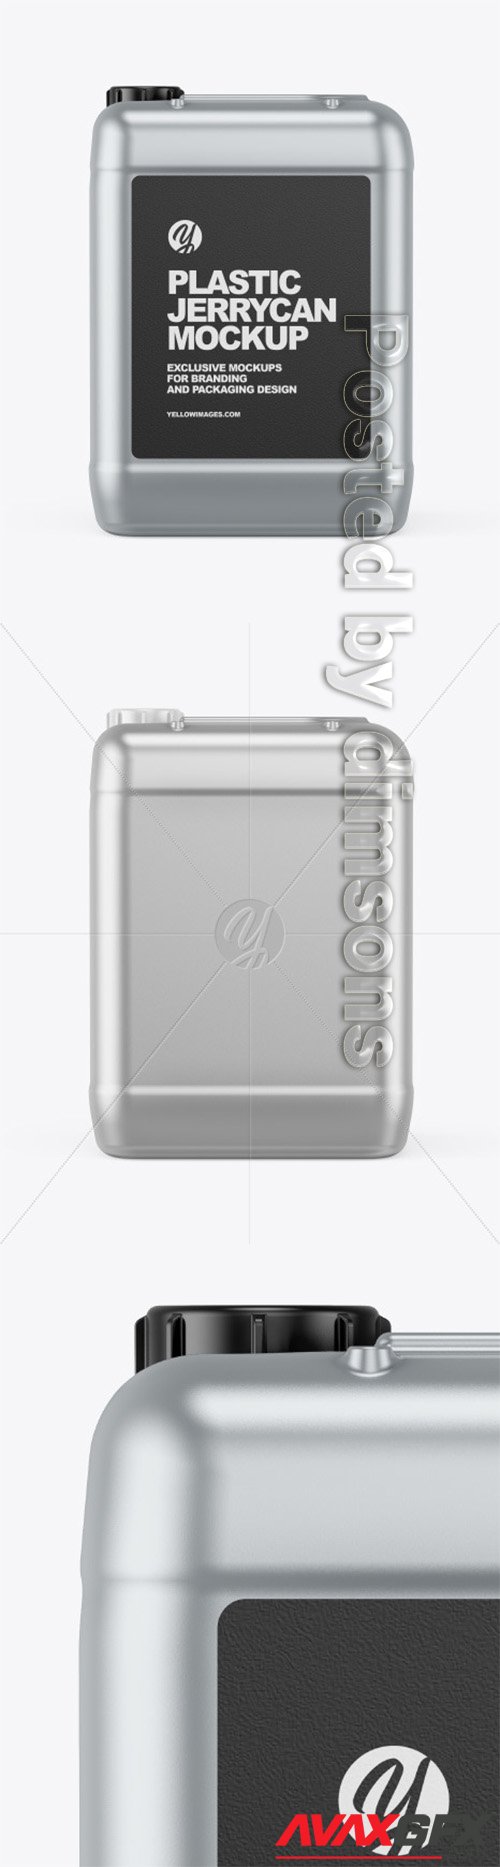 Download Plastic Jerrycan Mockup 64435 Avaxgfx All Downloads That You Need In One Place Graphic From Nitroflare Rapidgator PSD Mockup Templates